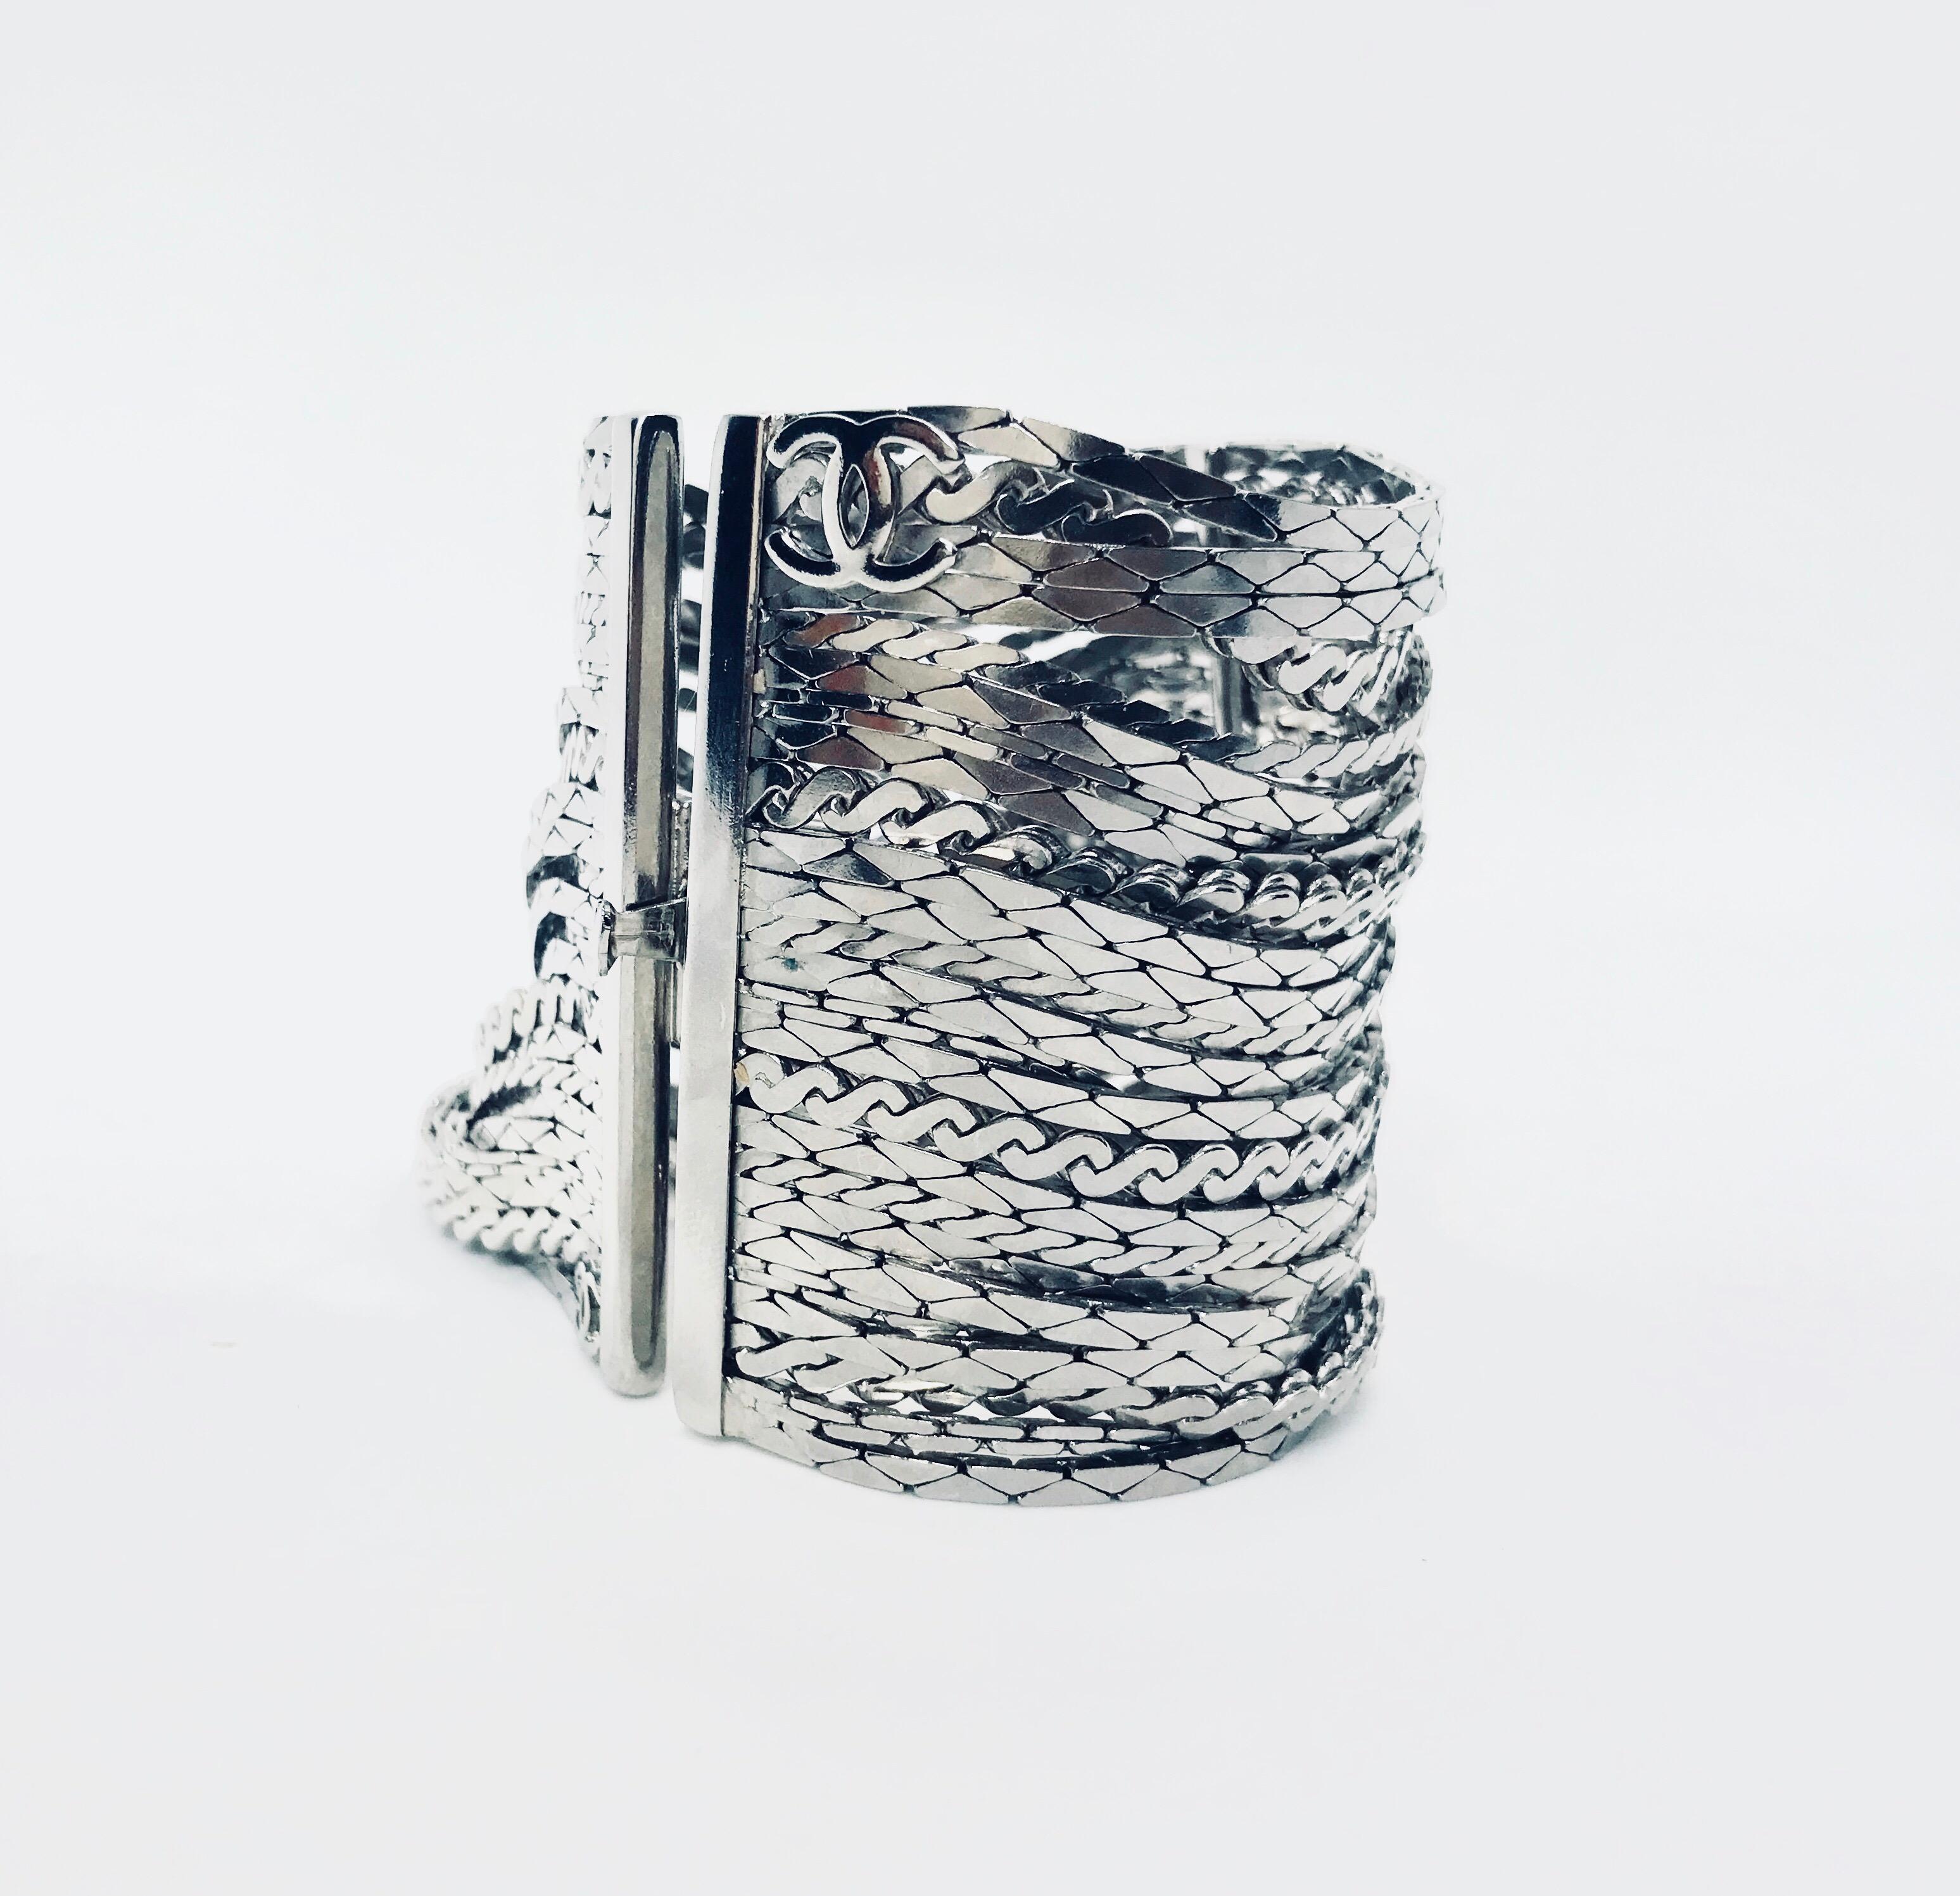 Chanel 90s Silver Plated Multi Strand Cuff Bracelet. From the Spring 1998 collection.

Designed to drape beautifully from the arm.

Measurements: 
6.75